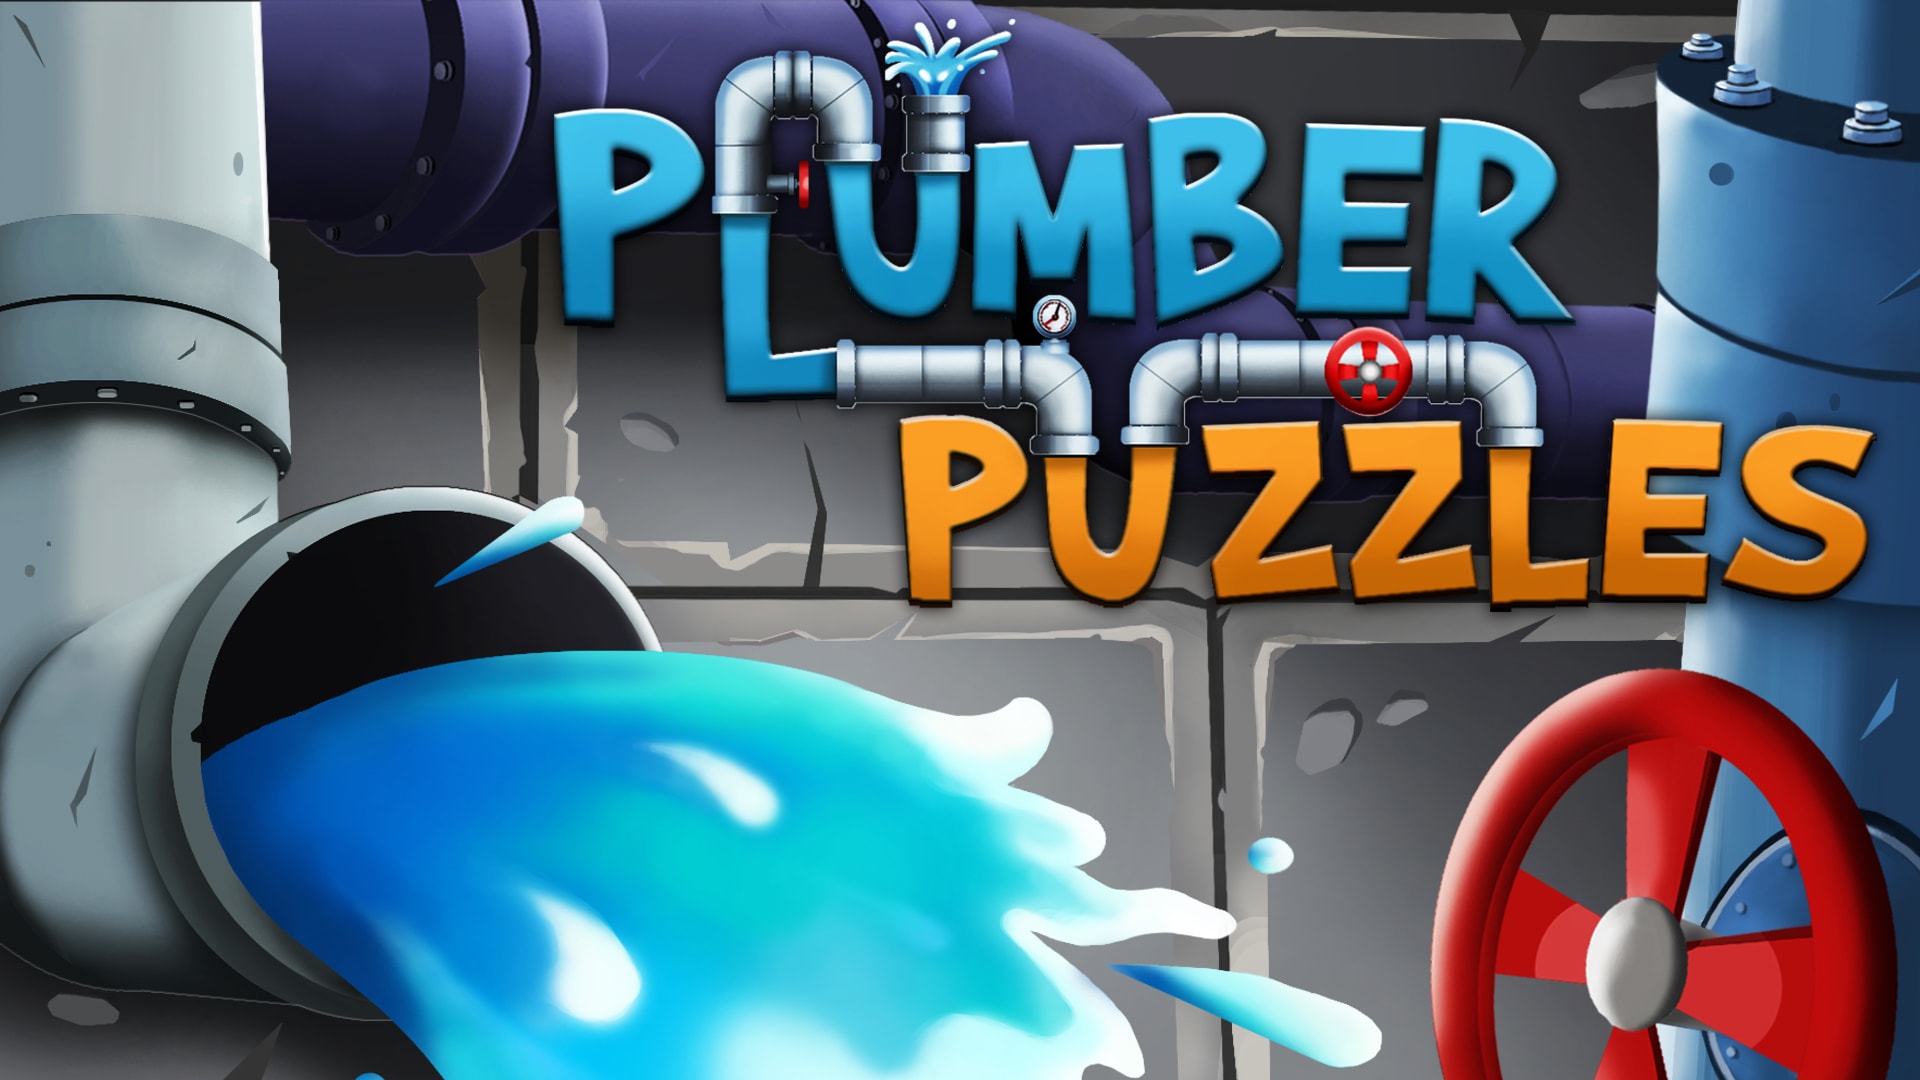 Plumber Puzzles